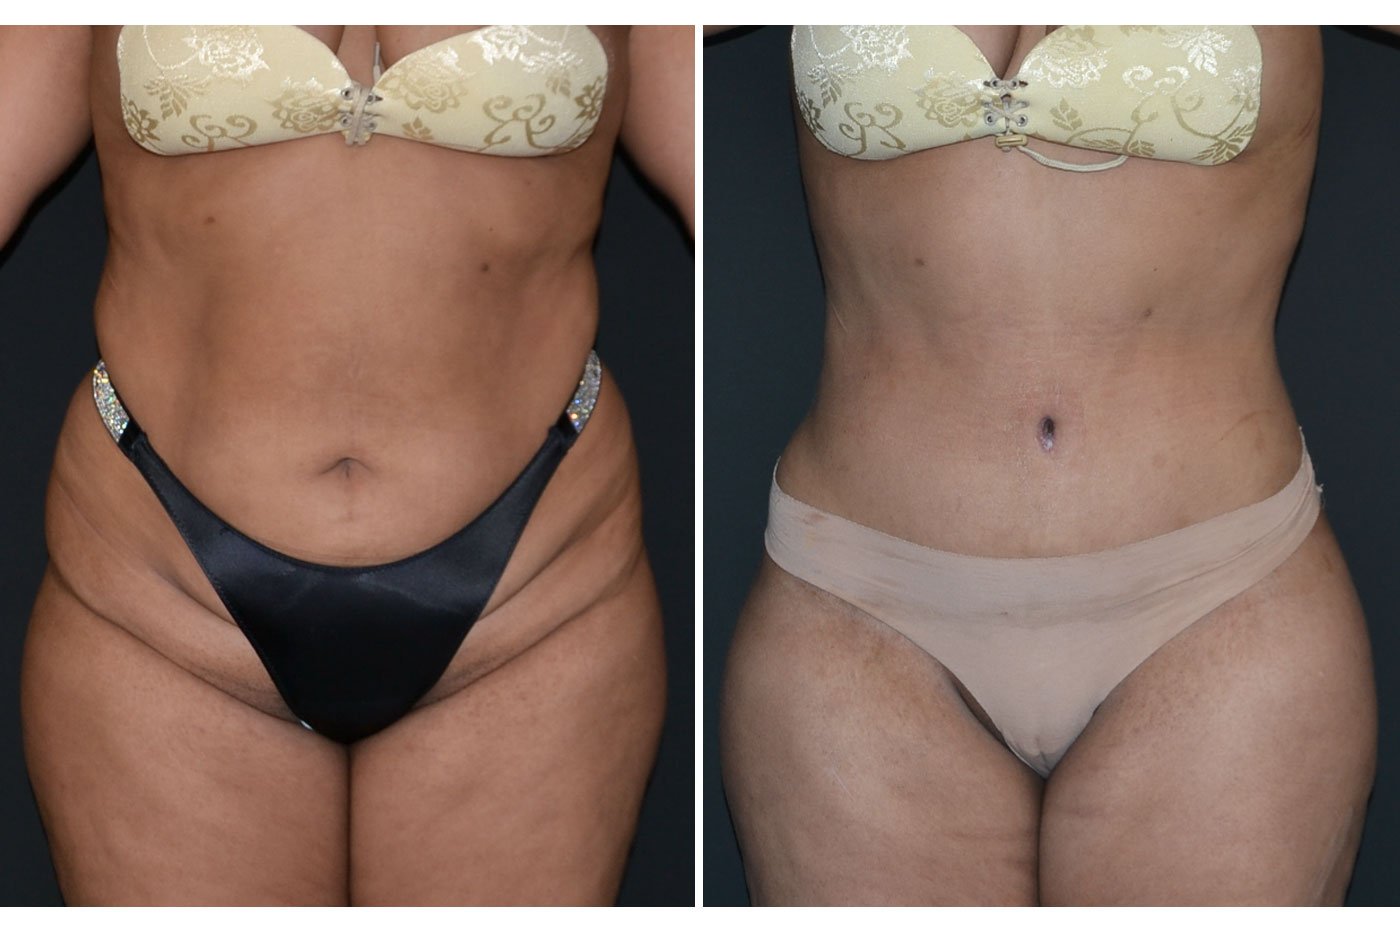 tummy tuck before (left) and after (right)